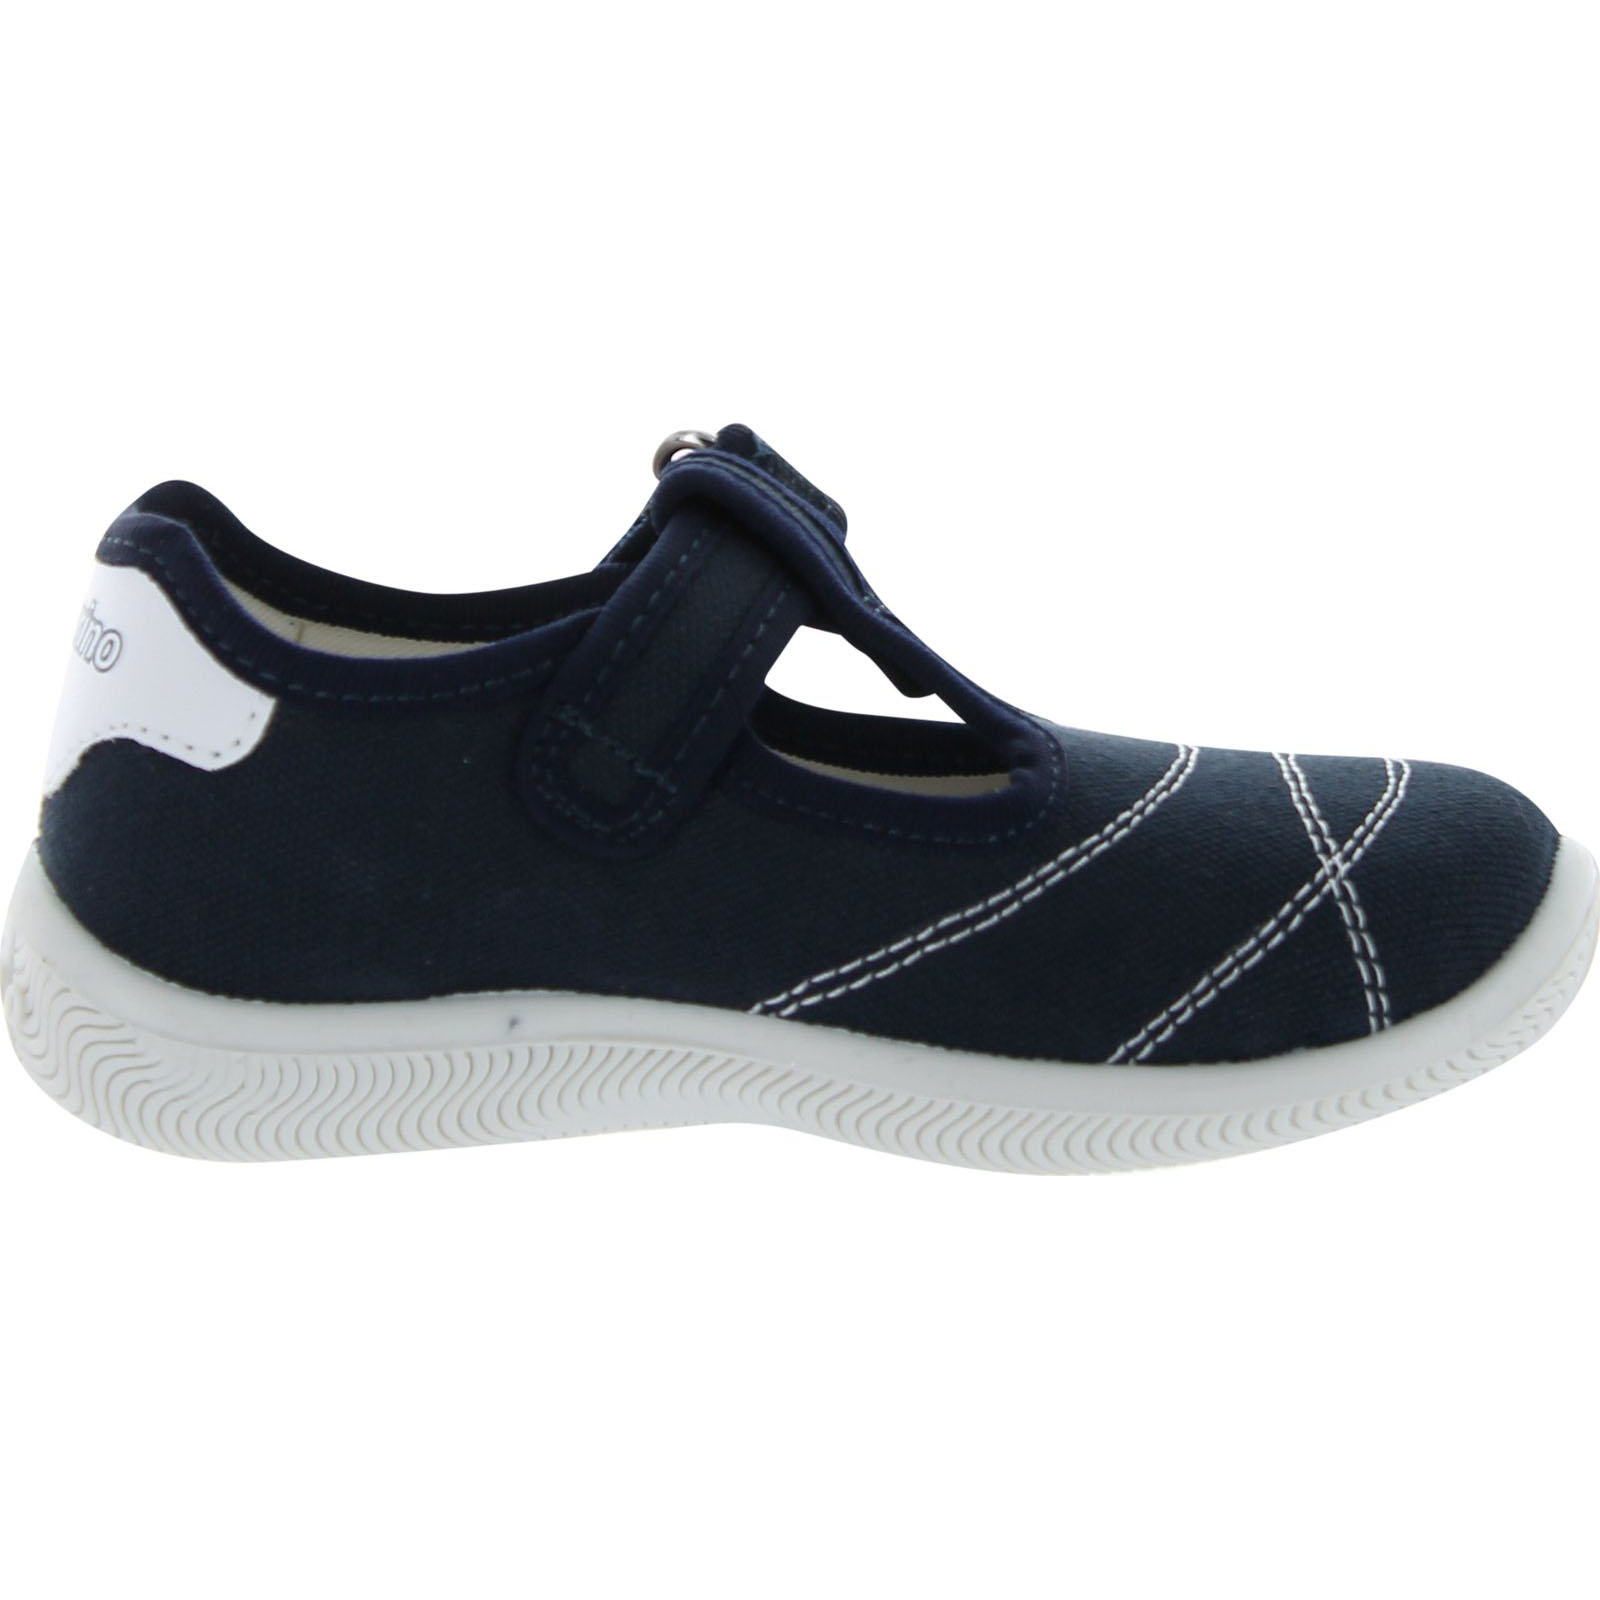 Naturino Boys 7742 Canvas T Strap Casual Shoes - image 2 of 4